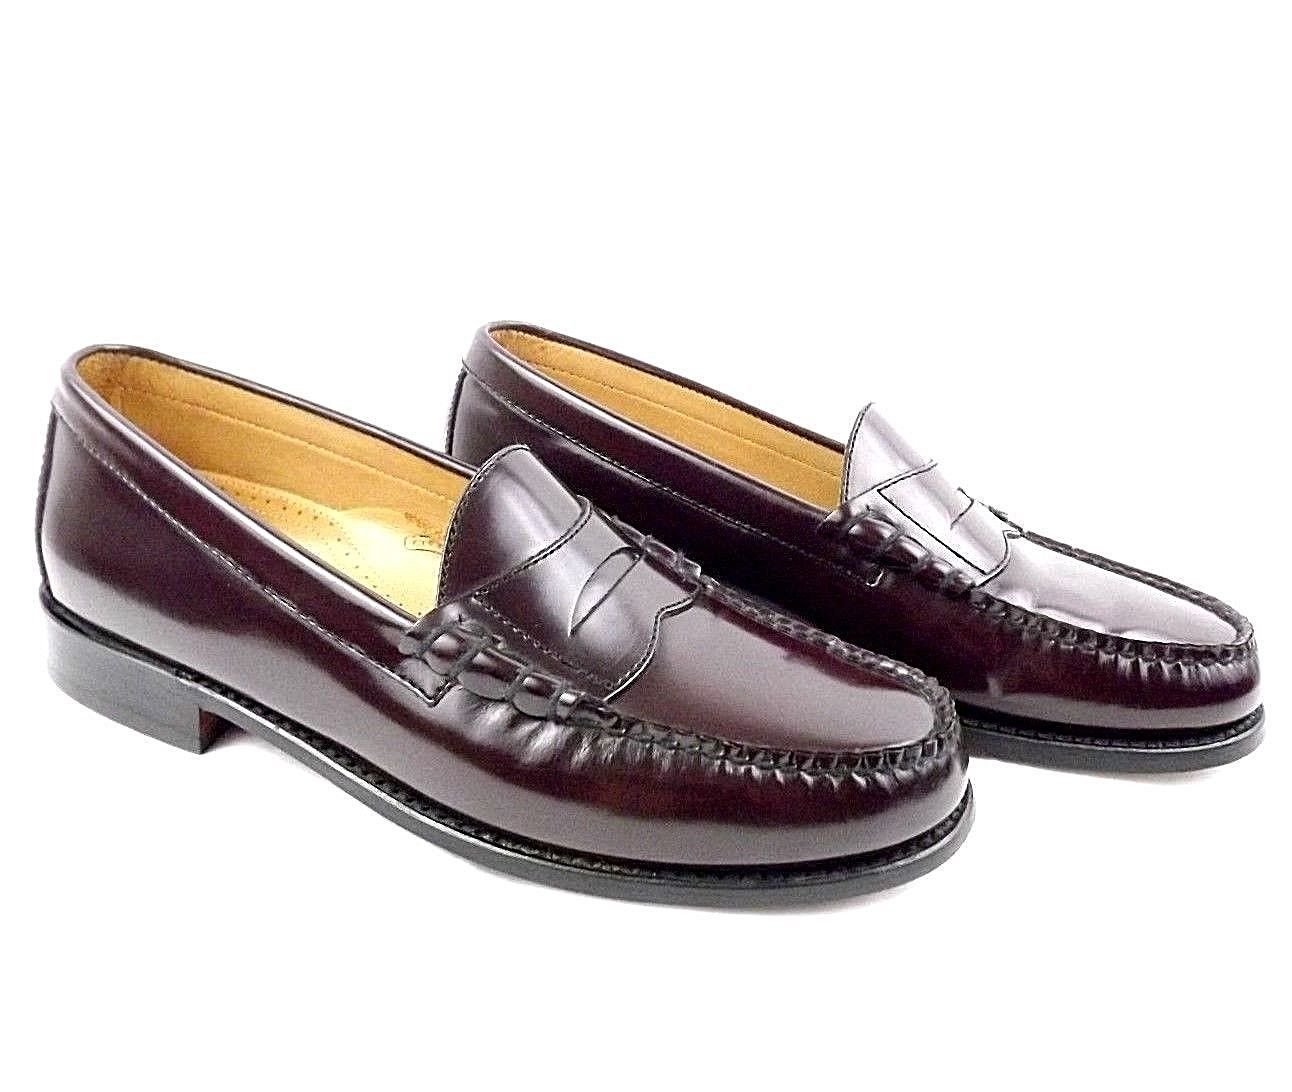 Bostonian Crown Windsor Mens Shoes Penny Loafers Size 10 D Burgundy ...